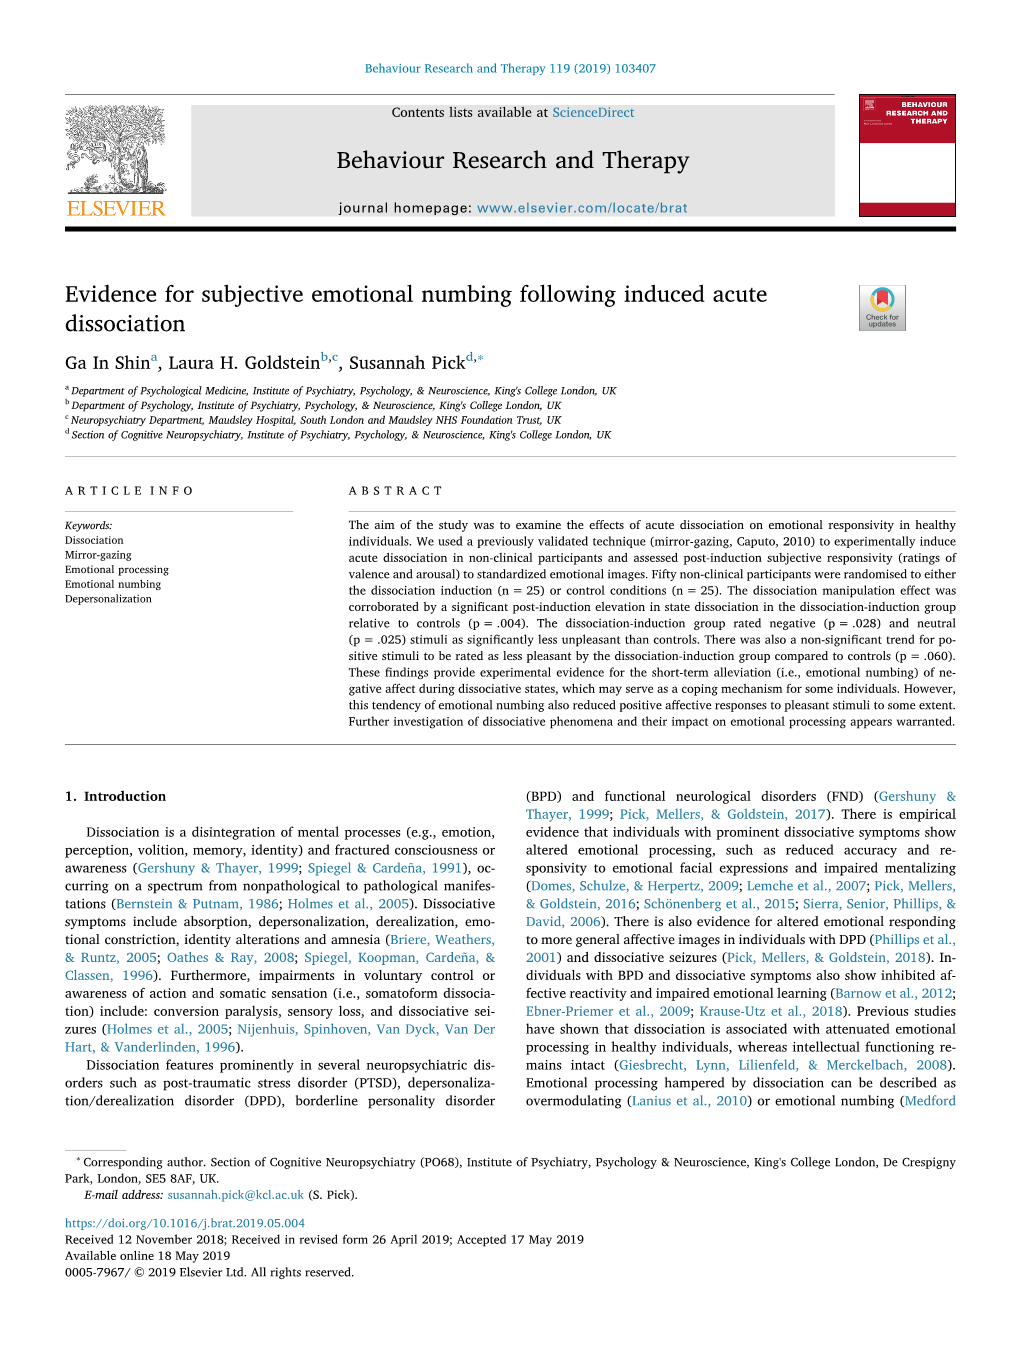 Evidence for Subjective Emotional Numbing Following Induced Acute Dissociation T